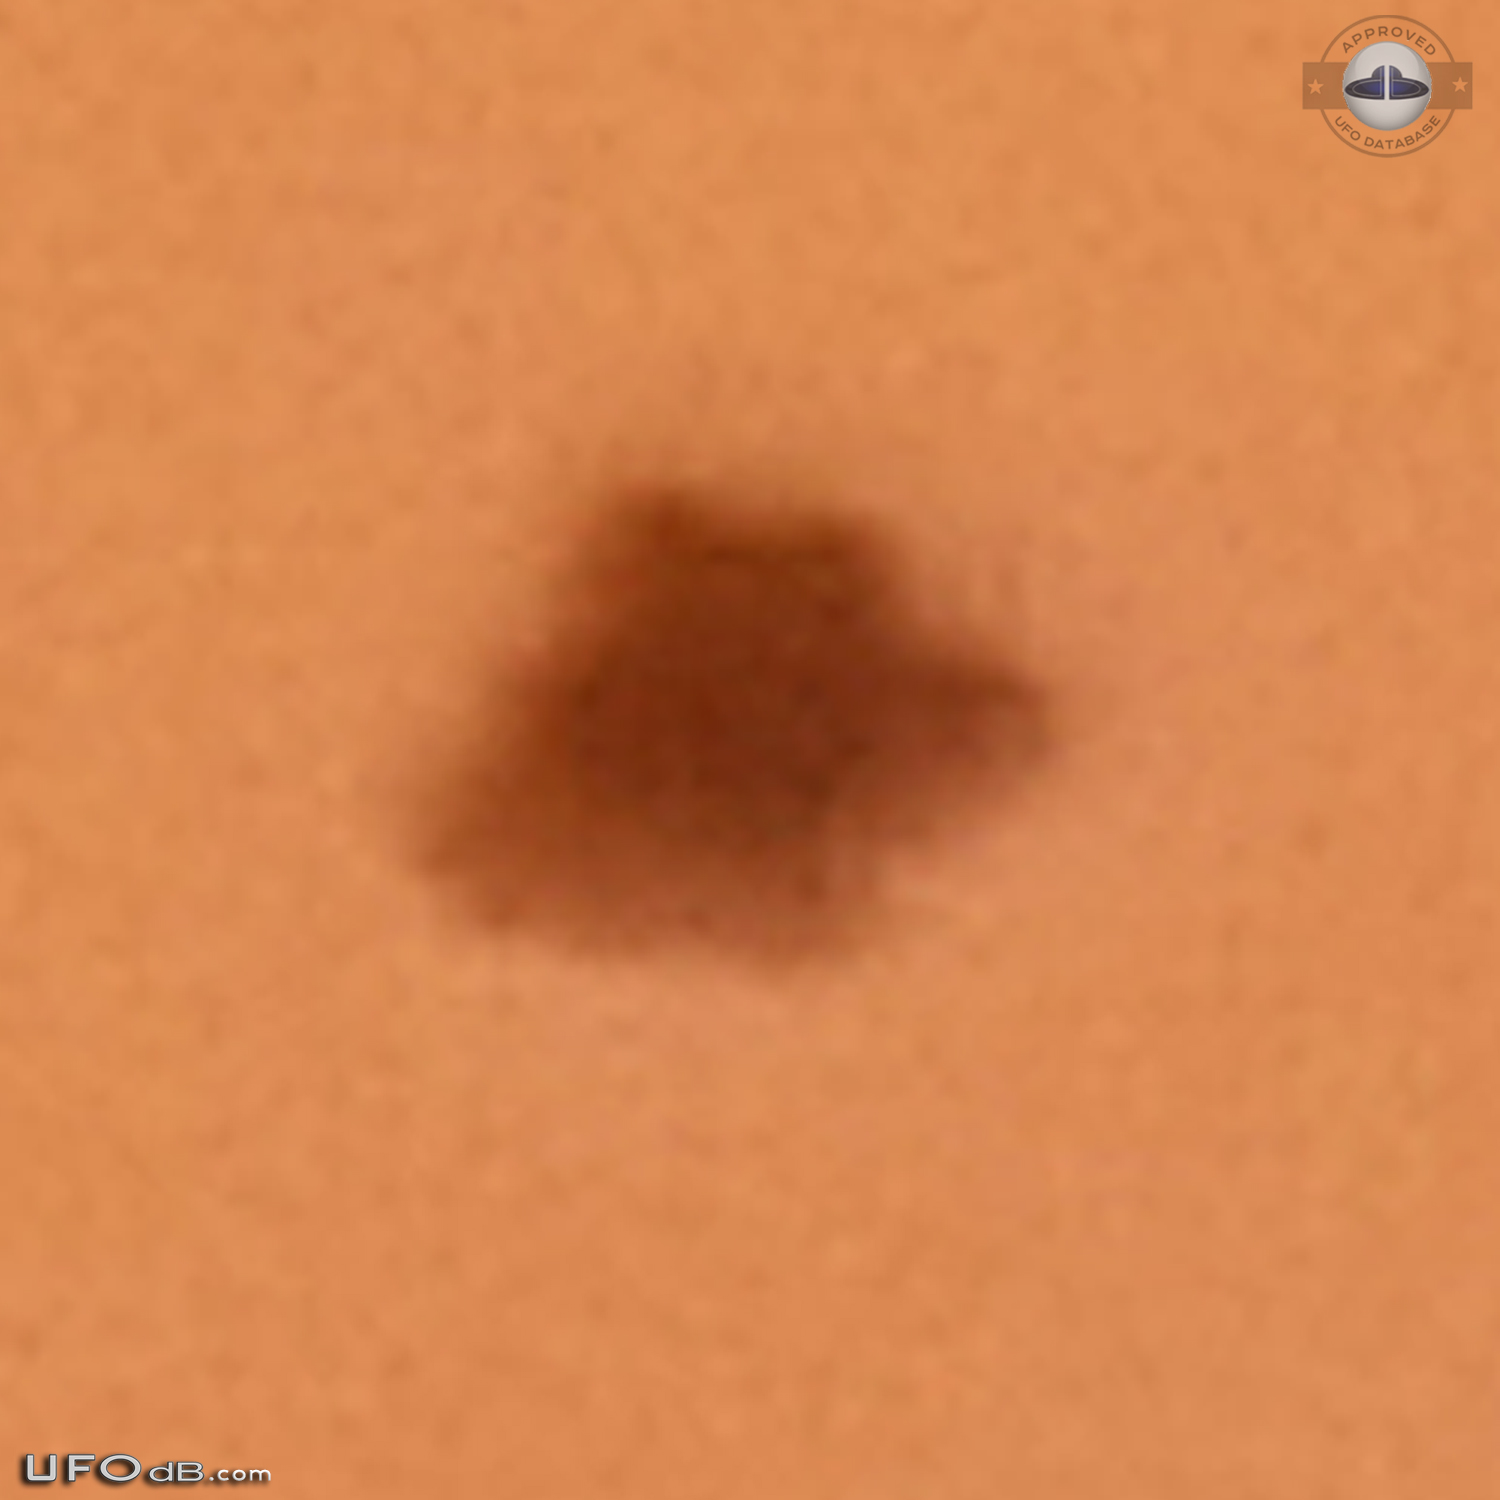 3 witness saw a black bell UFO disappearing in clouds - Australia 2013 UFO Picture #551-4